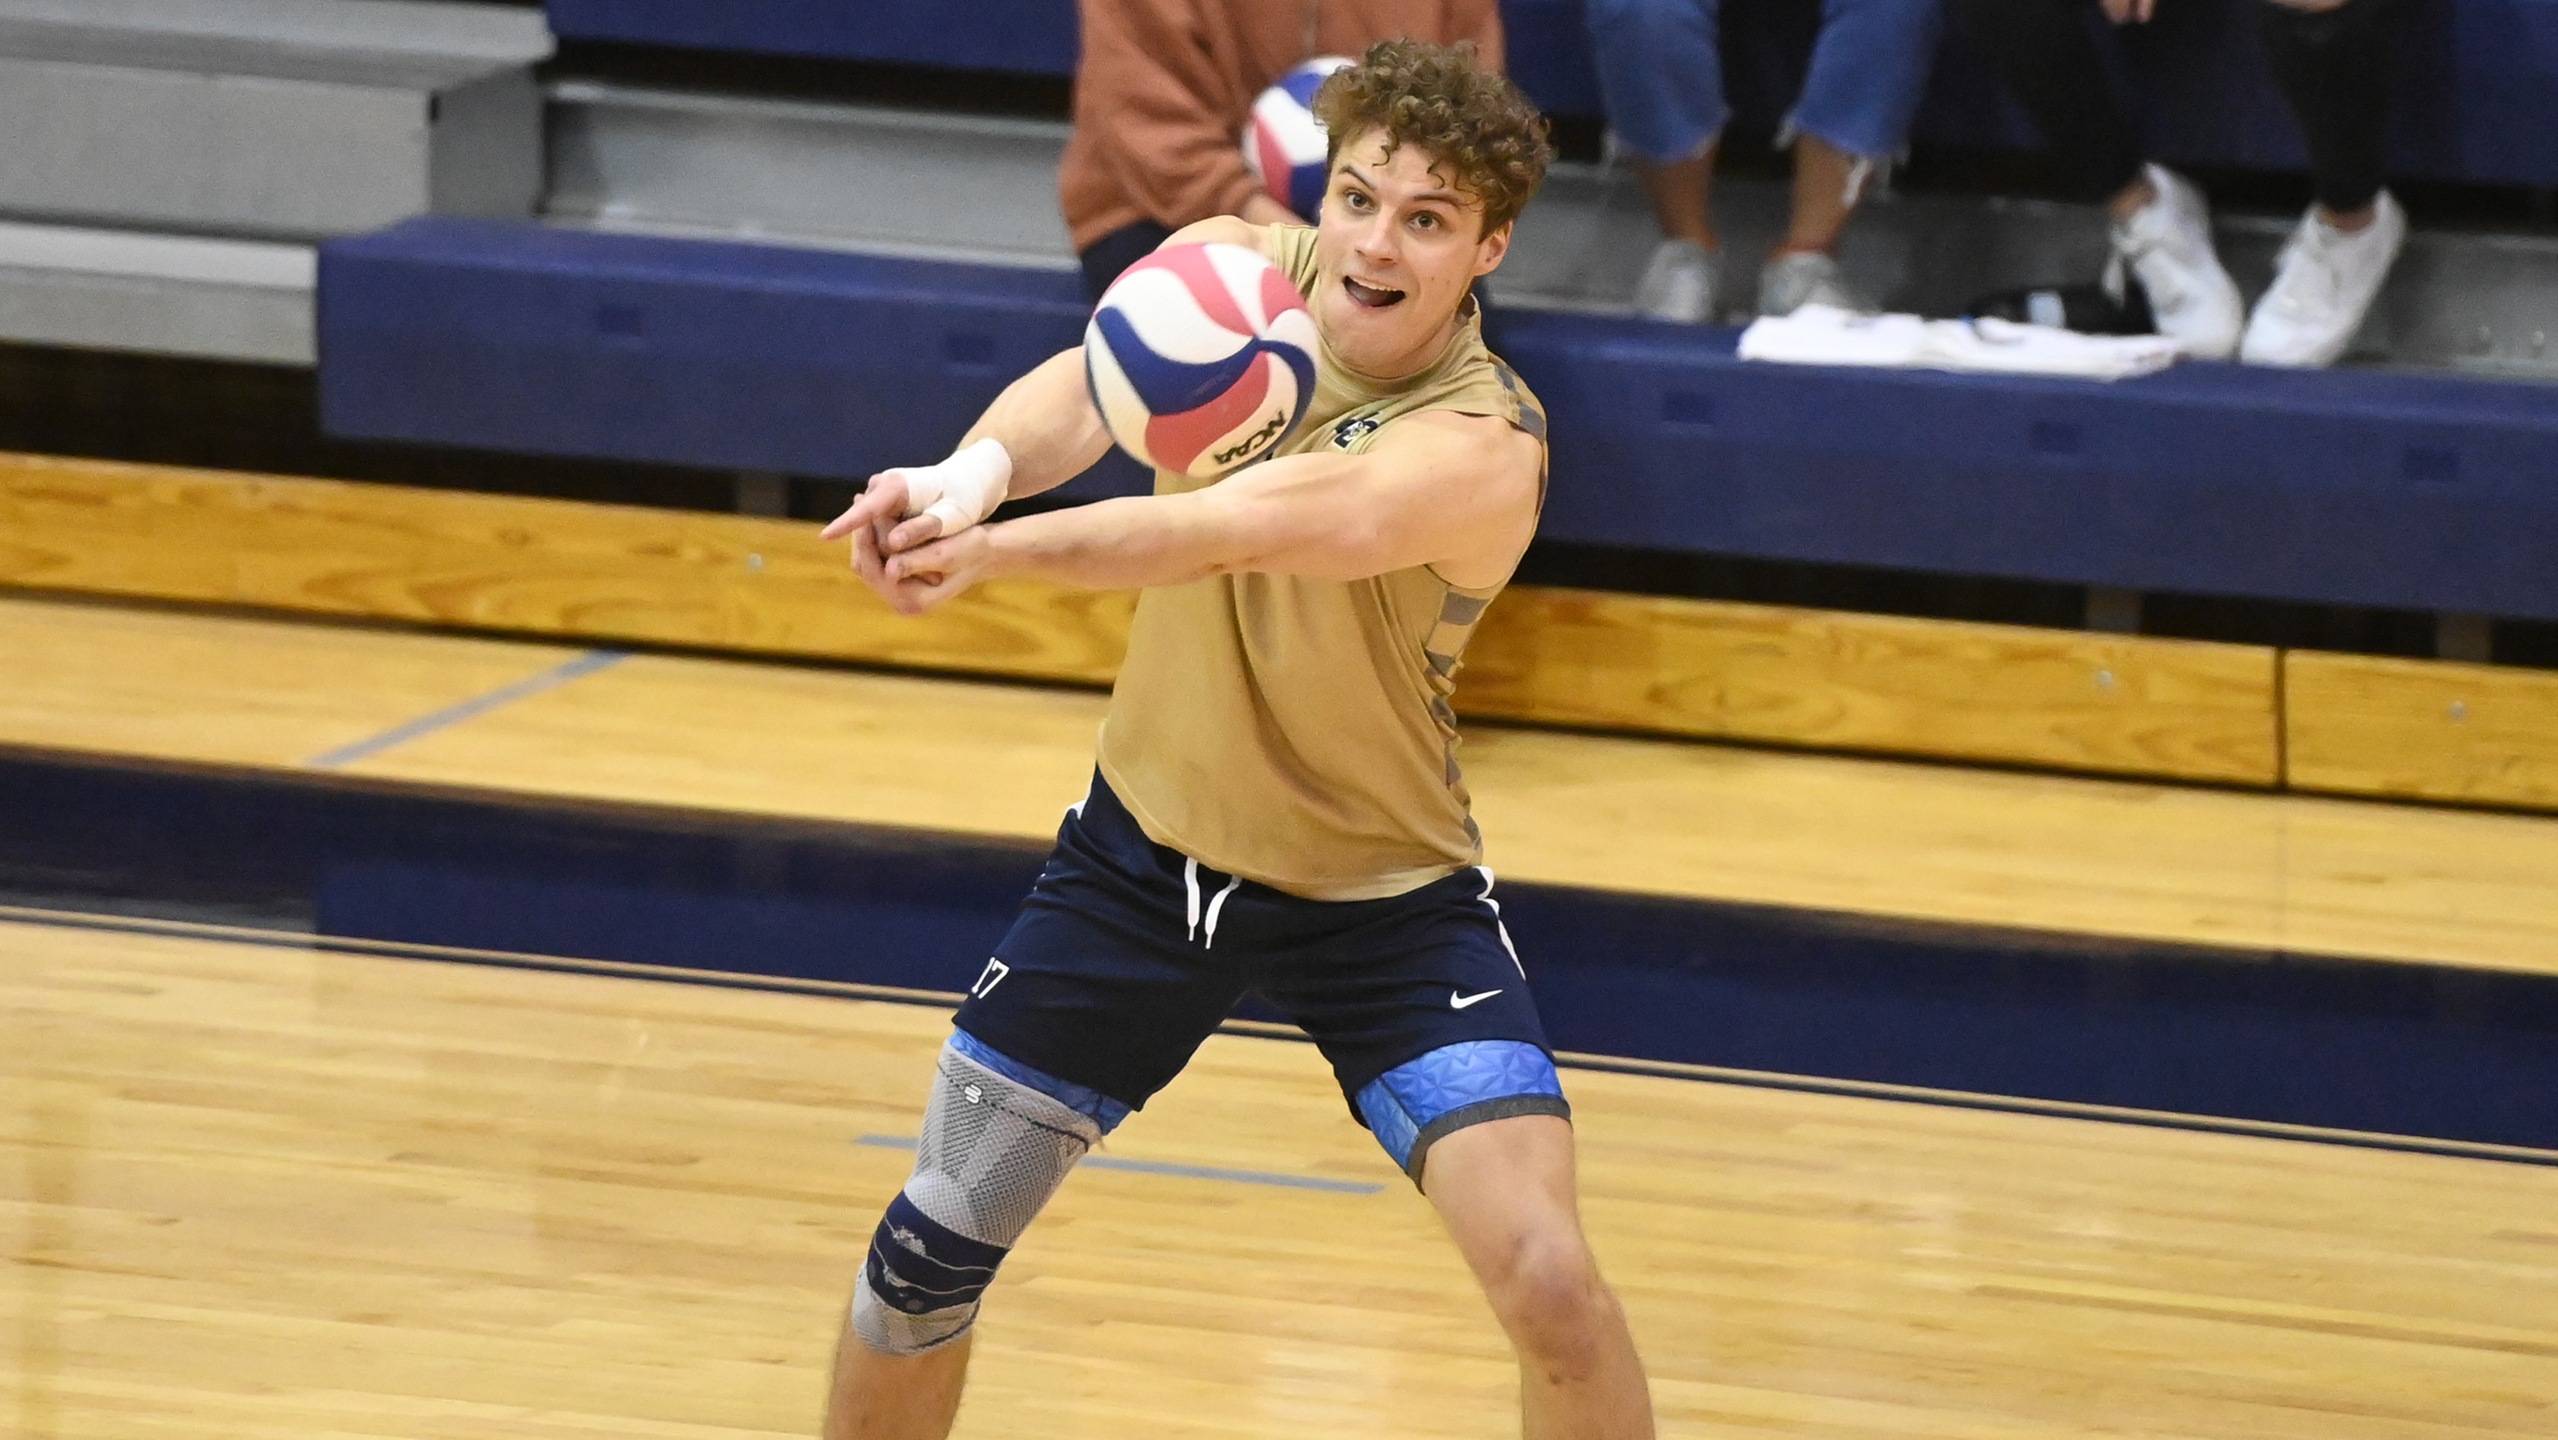 Men's Volleyball Wraps Regular Season with Two Sweeps